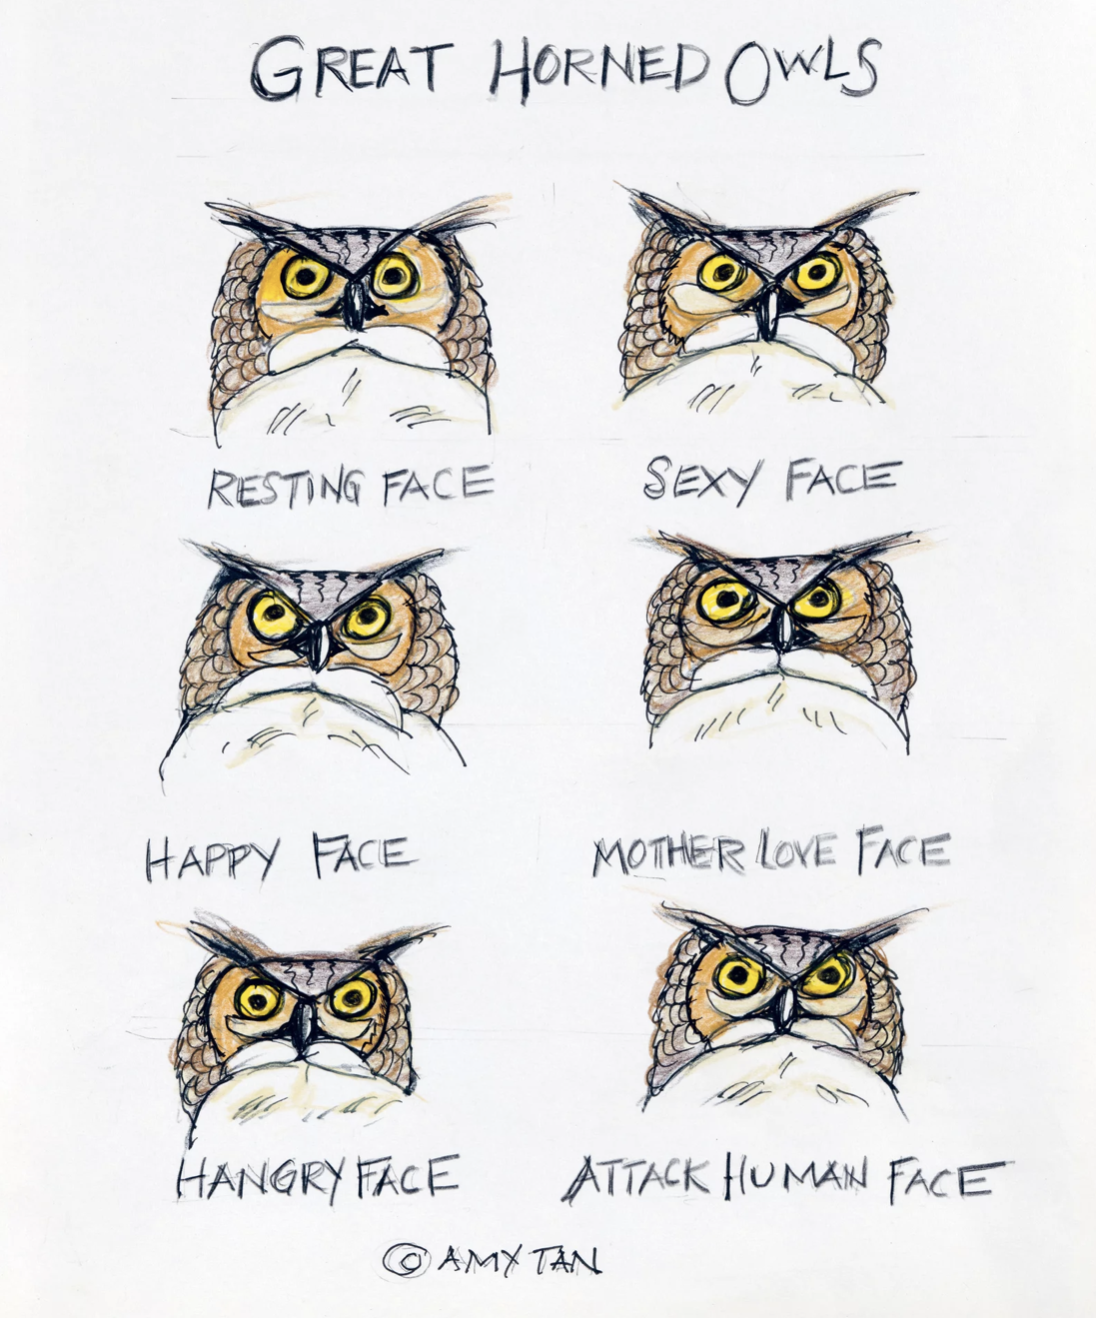 Six sketches of owl's facial expressions, labeled Great Horned Owls.